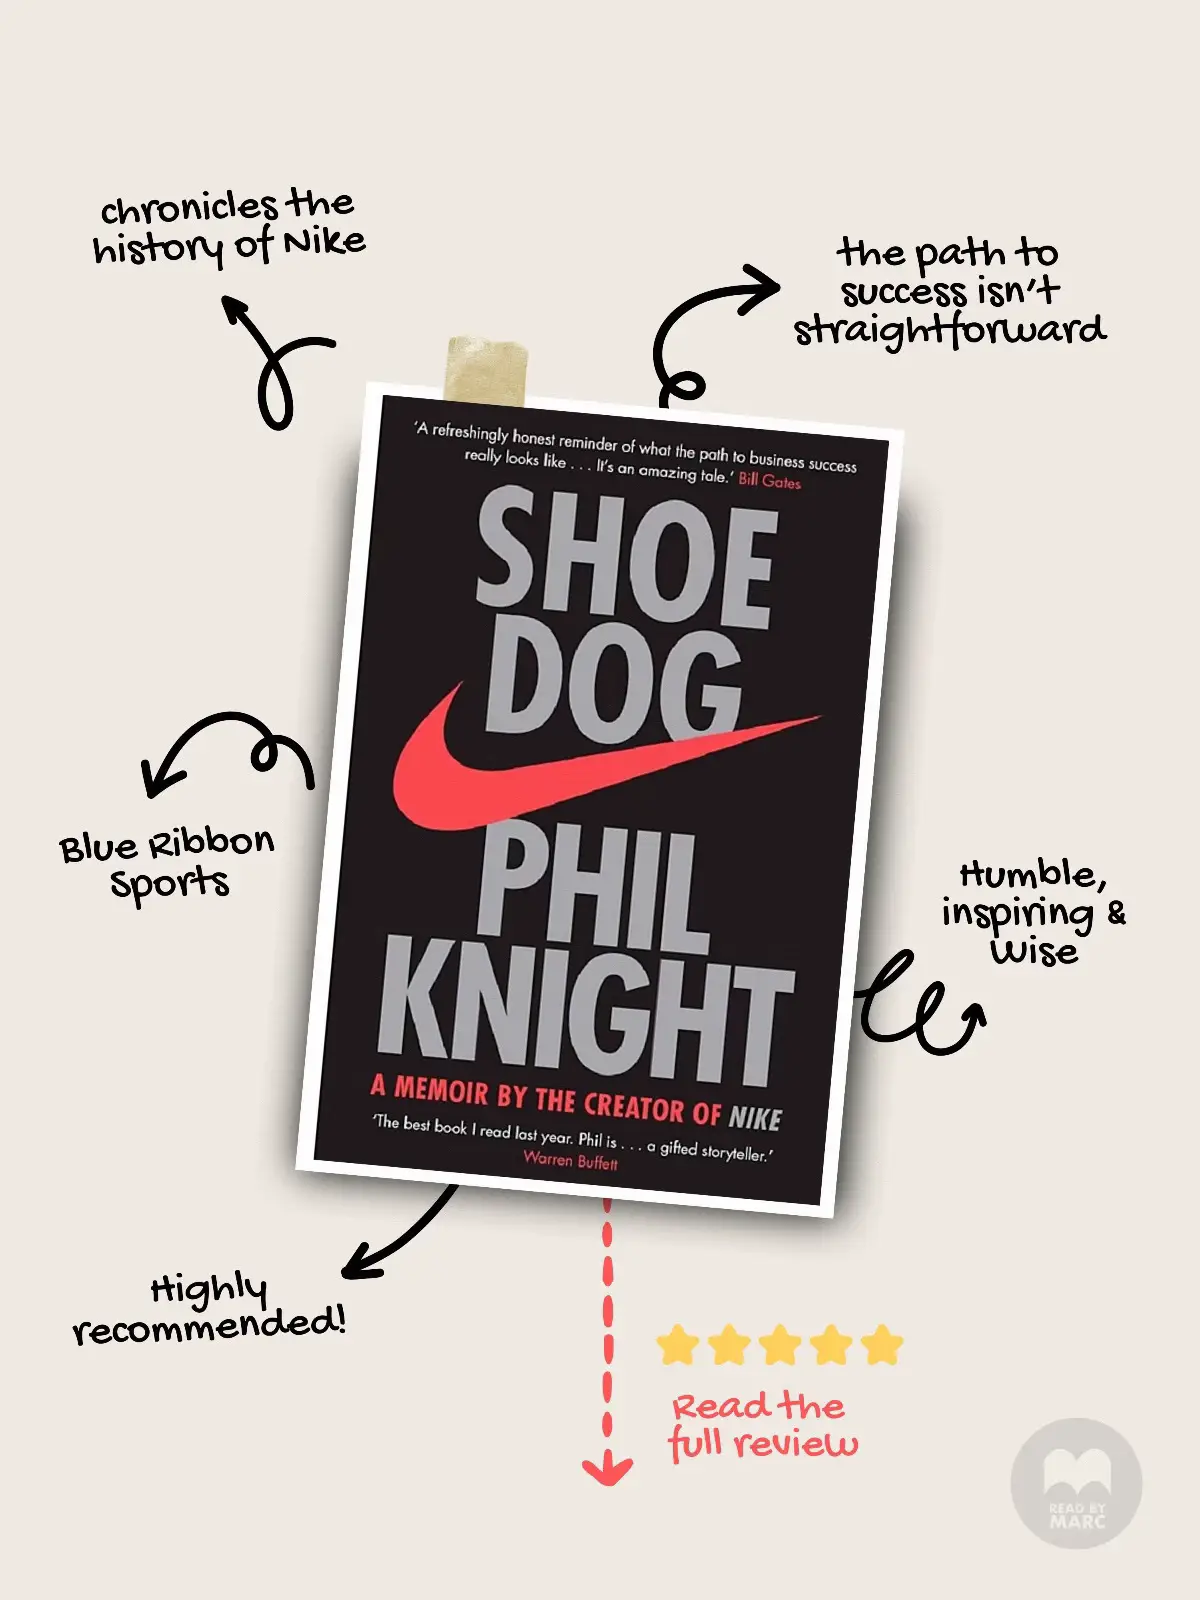 Books Shoe Dog - A Memoir by the Creator of Nike by Phil Knight Multi